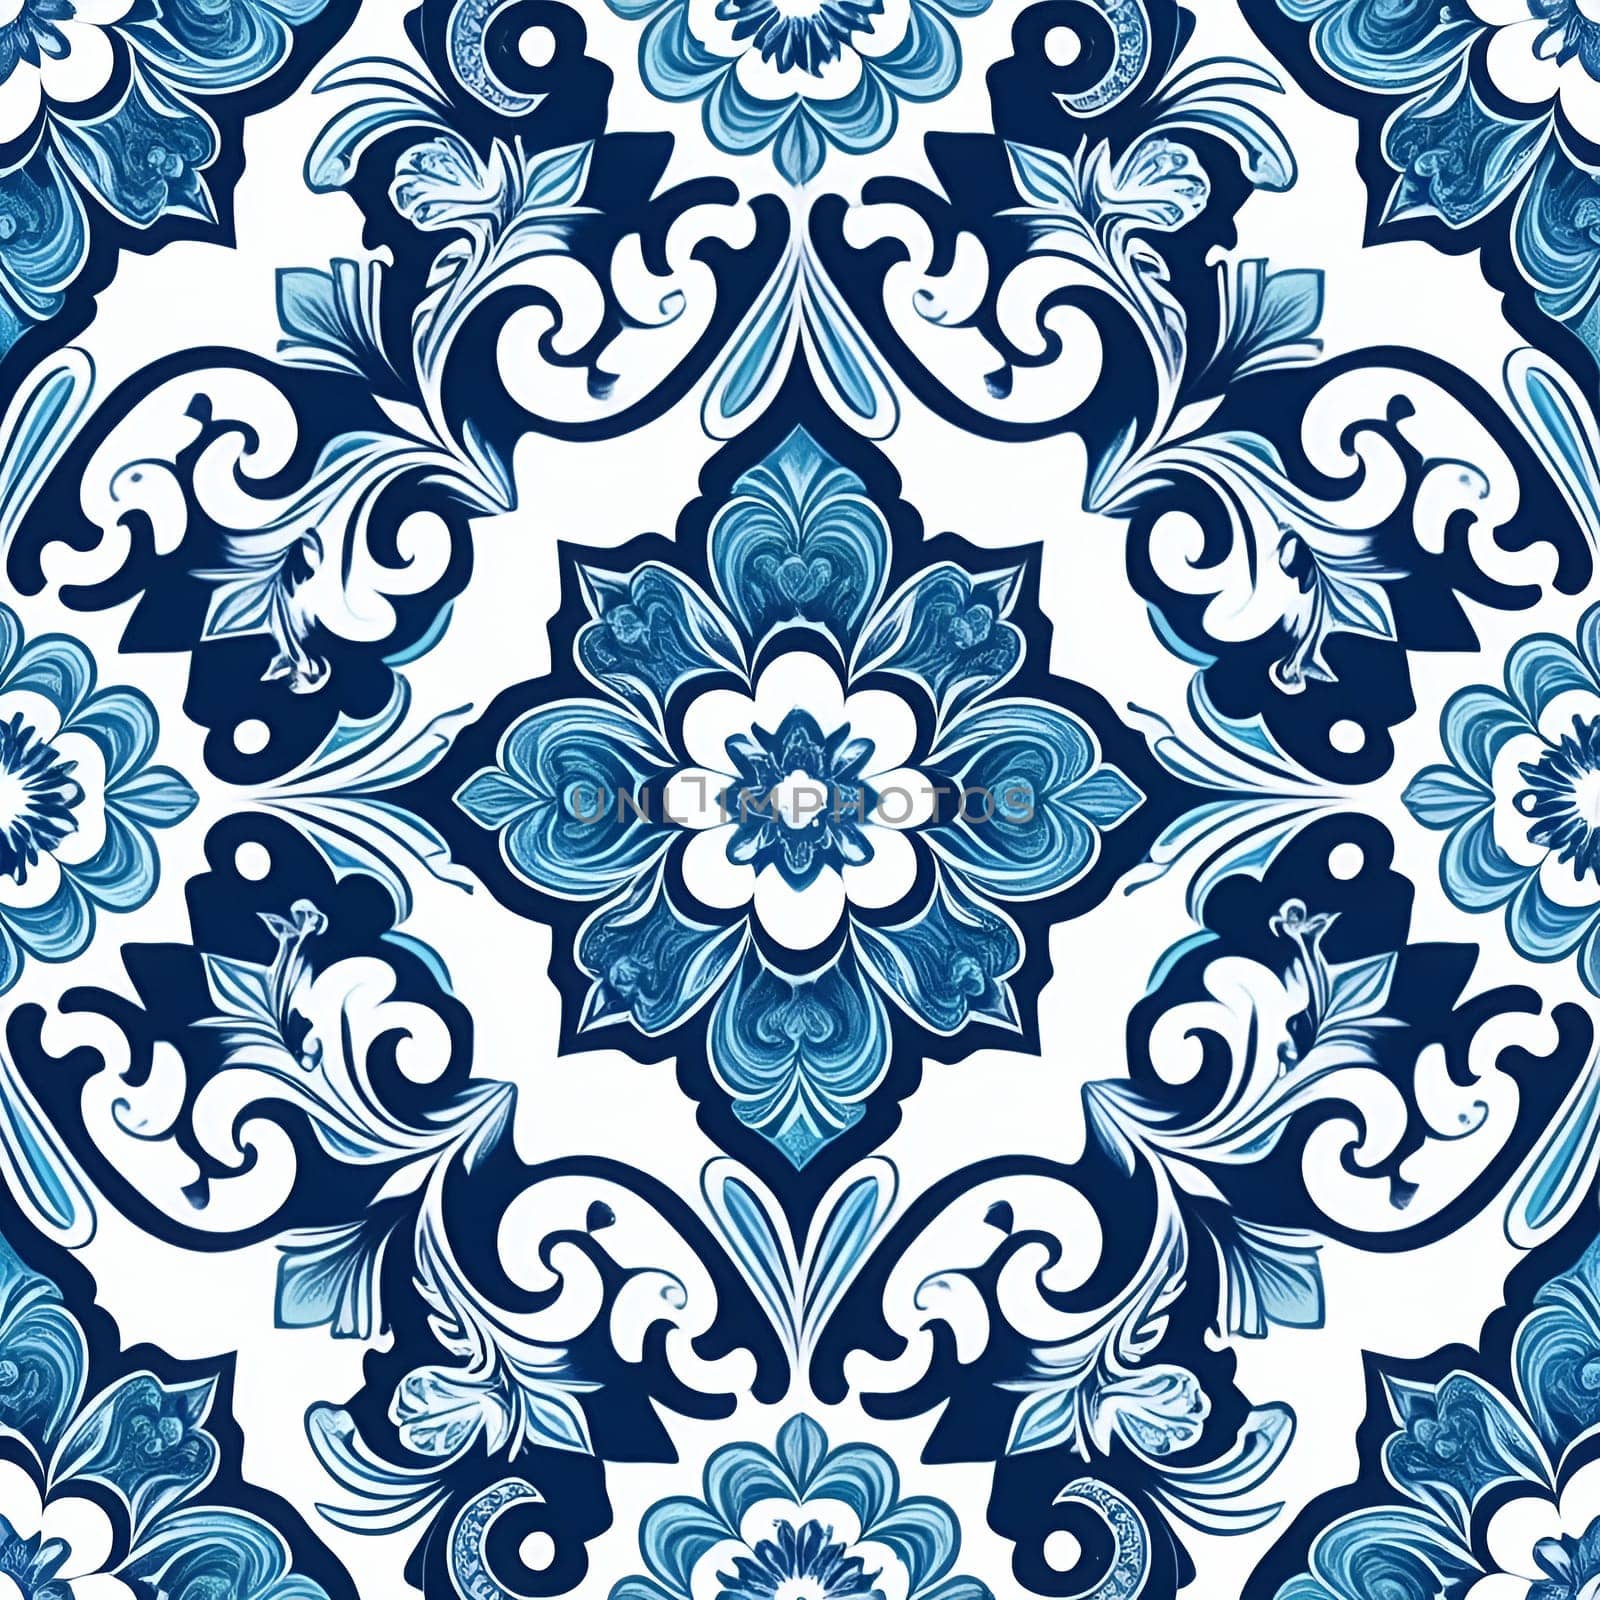 Blue and White Floral Pattern - Classic and Elegant by gallofoto